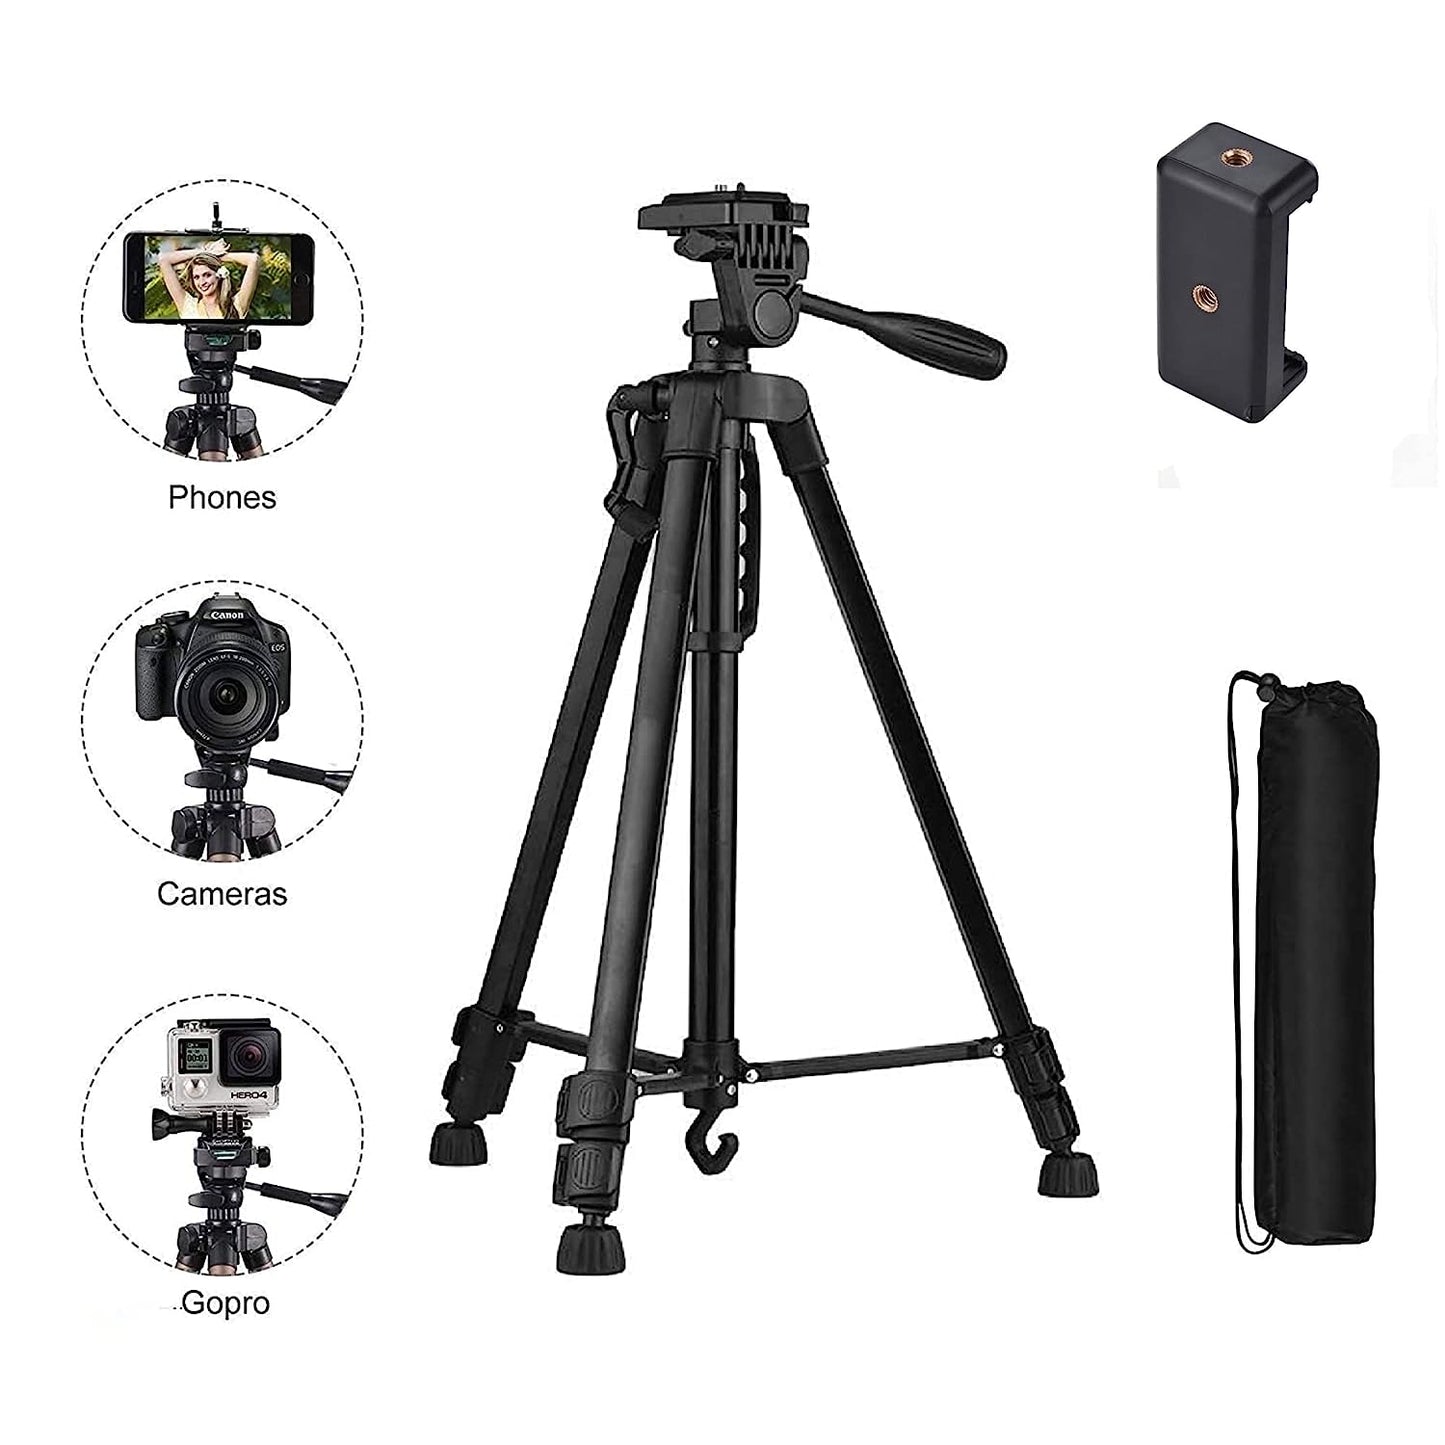 EYUVAA 55 Inch Aluminum Camera Tripod for All DSLR Cameras & Mobile Phones with Phone Holder for Videos & Photos (Multicolor)